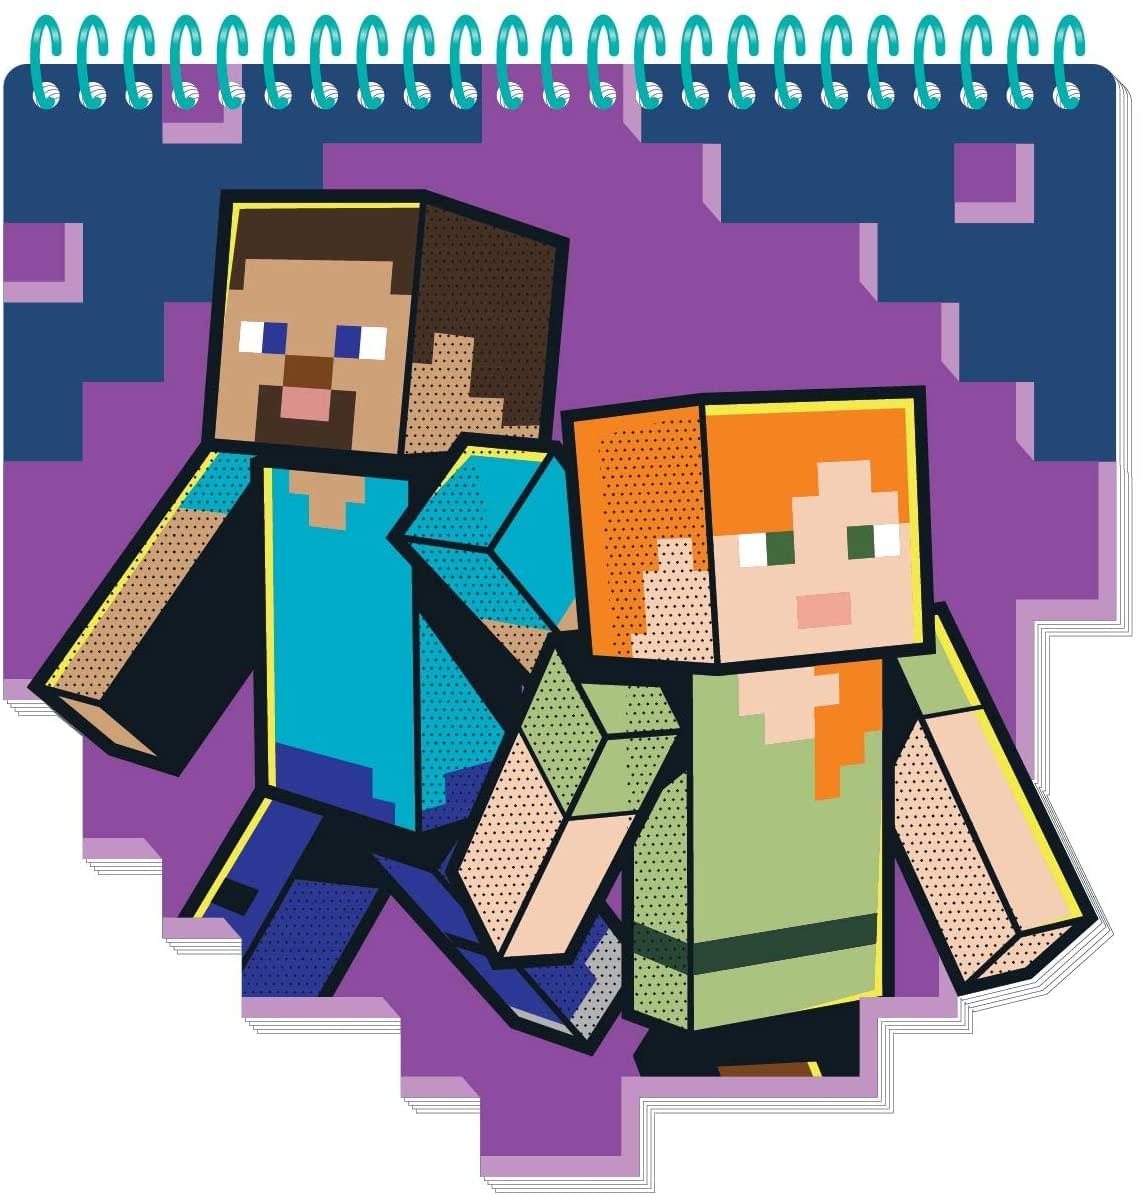 Minecraft Kids Coloring Art Set | Stickers & Stampers